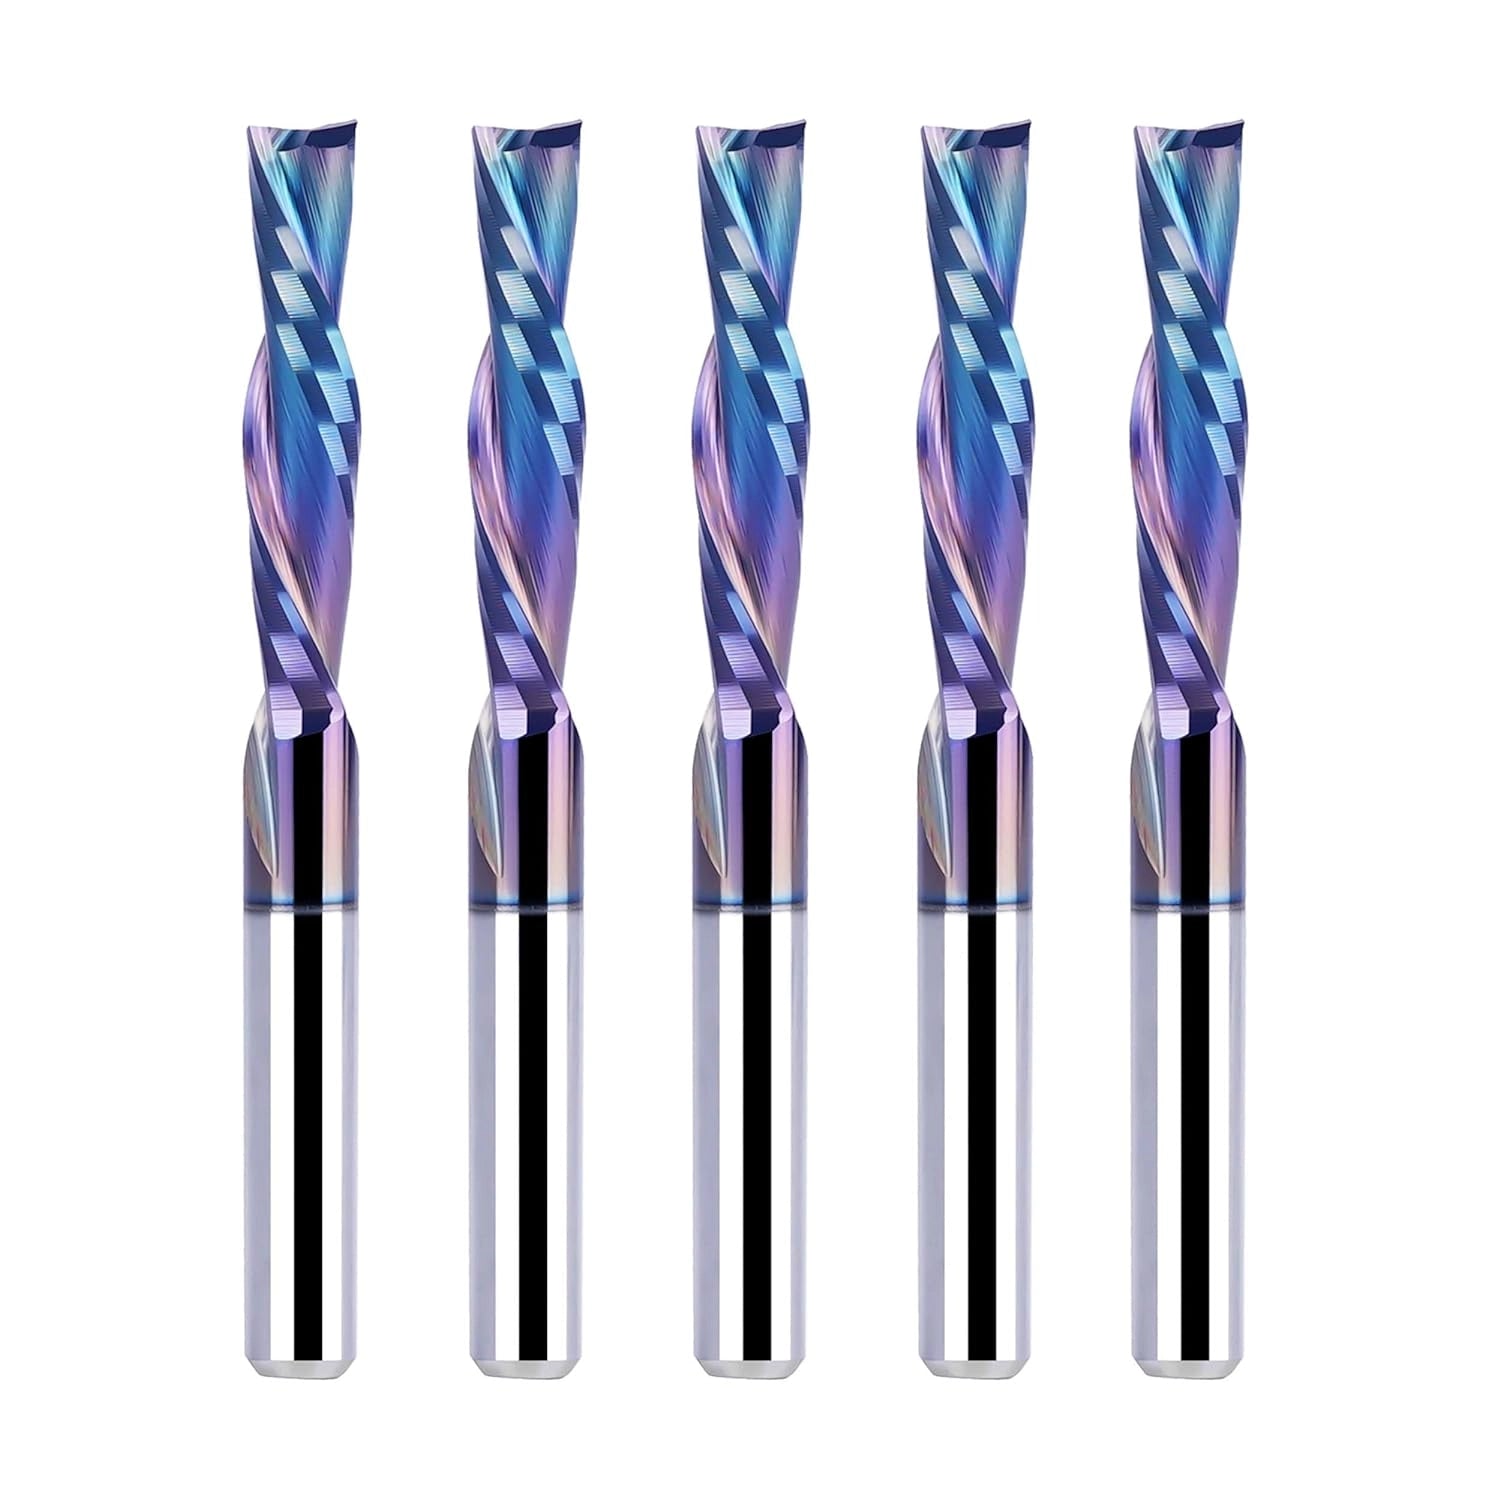 SpeTool W04038 SPE-X Extra Tool Life Coated SC Spiral Plunge 1/8" Dia x 1/8" Shank x 3/4" Cutting Length x 1-1/2" Long 2 Flute Down-Cut Router Bit